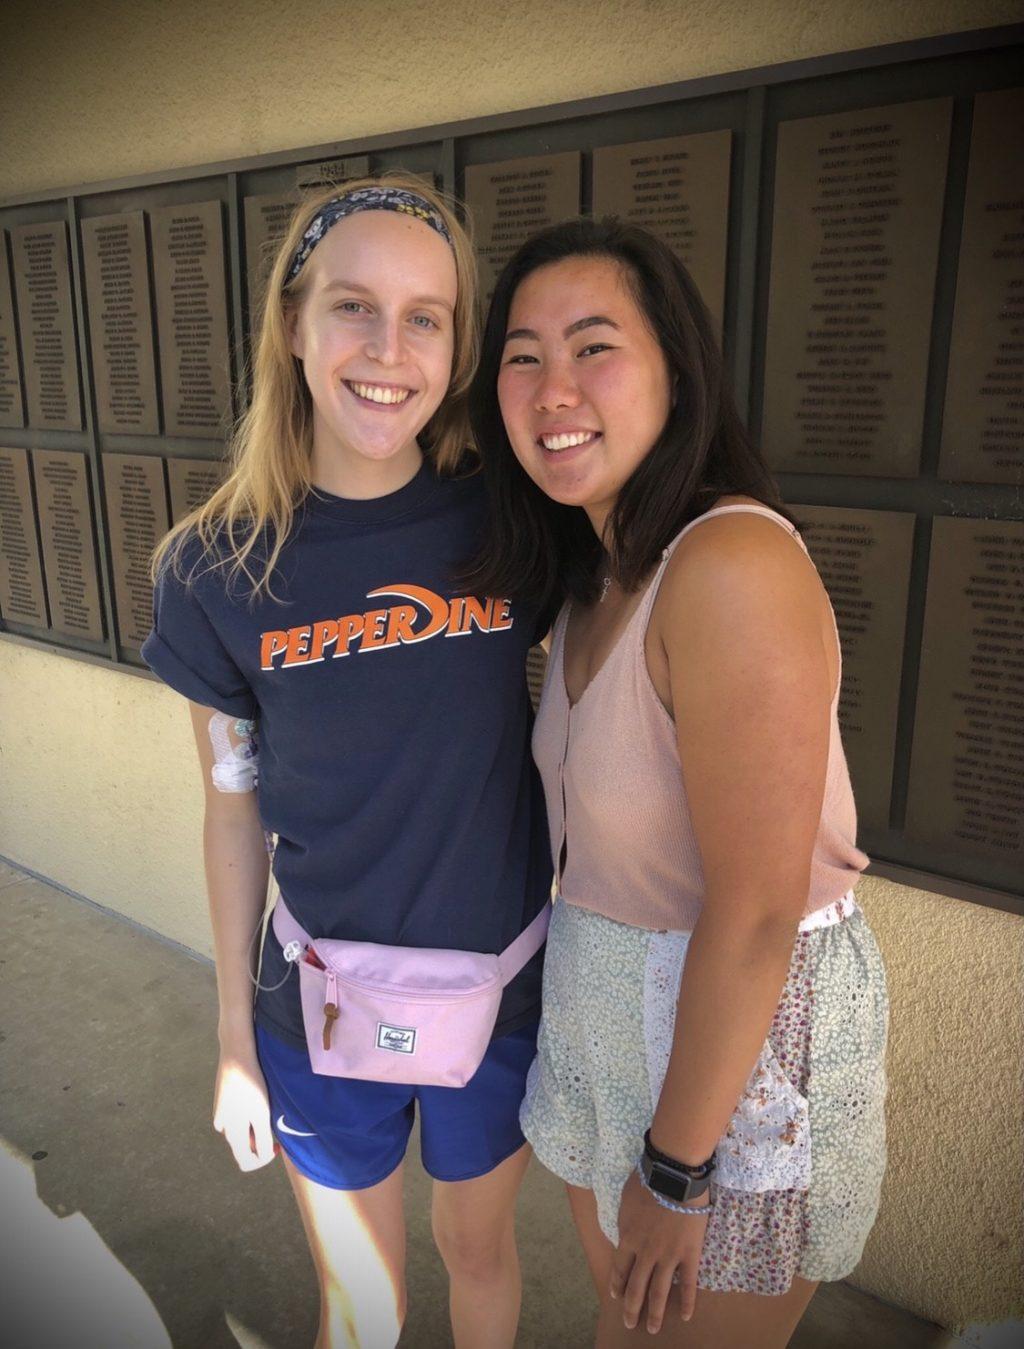 Vander Mey (left) poses with her good friend, senior Kim Yeung (right), on campus in September 2019. Vander Mey said her own medical experiences grew her passion for wanting to serve others as a registered dietitian in a hospital.